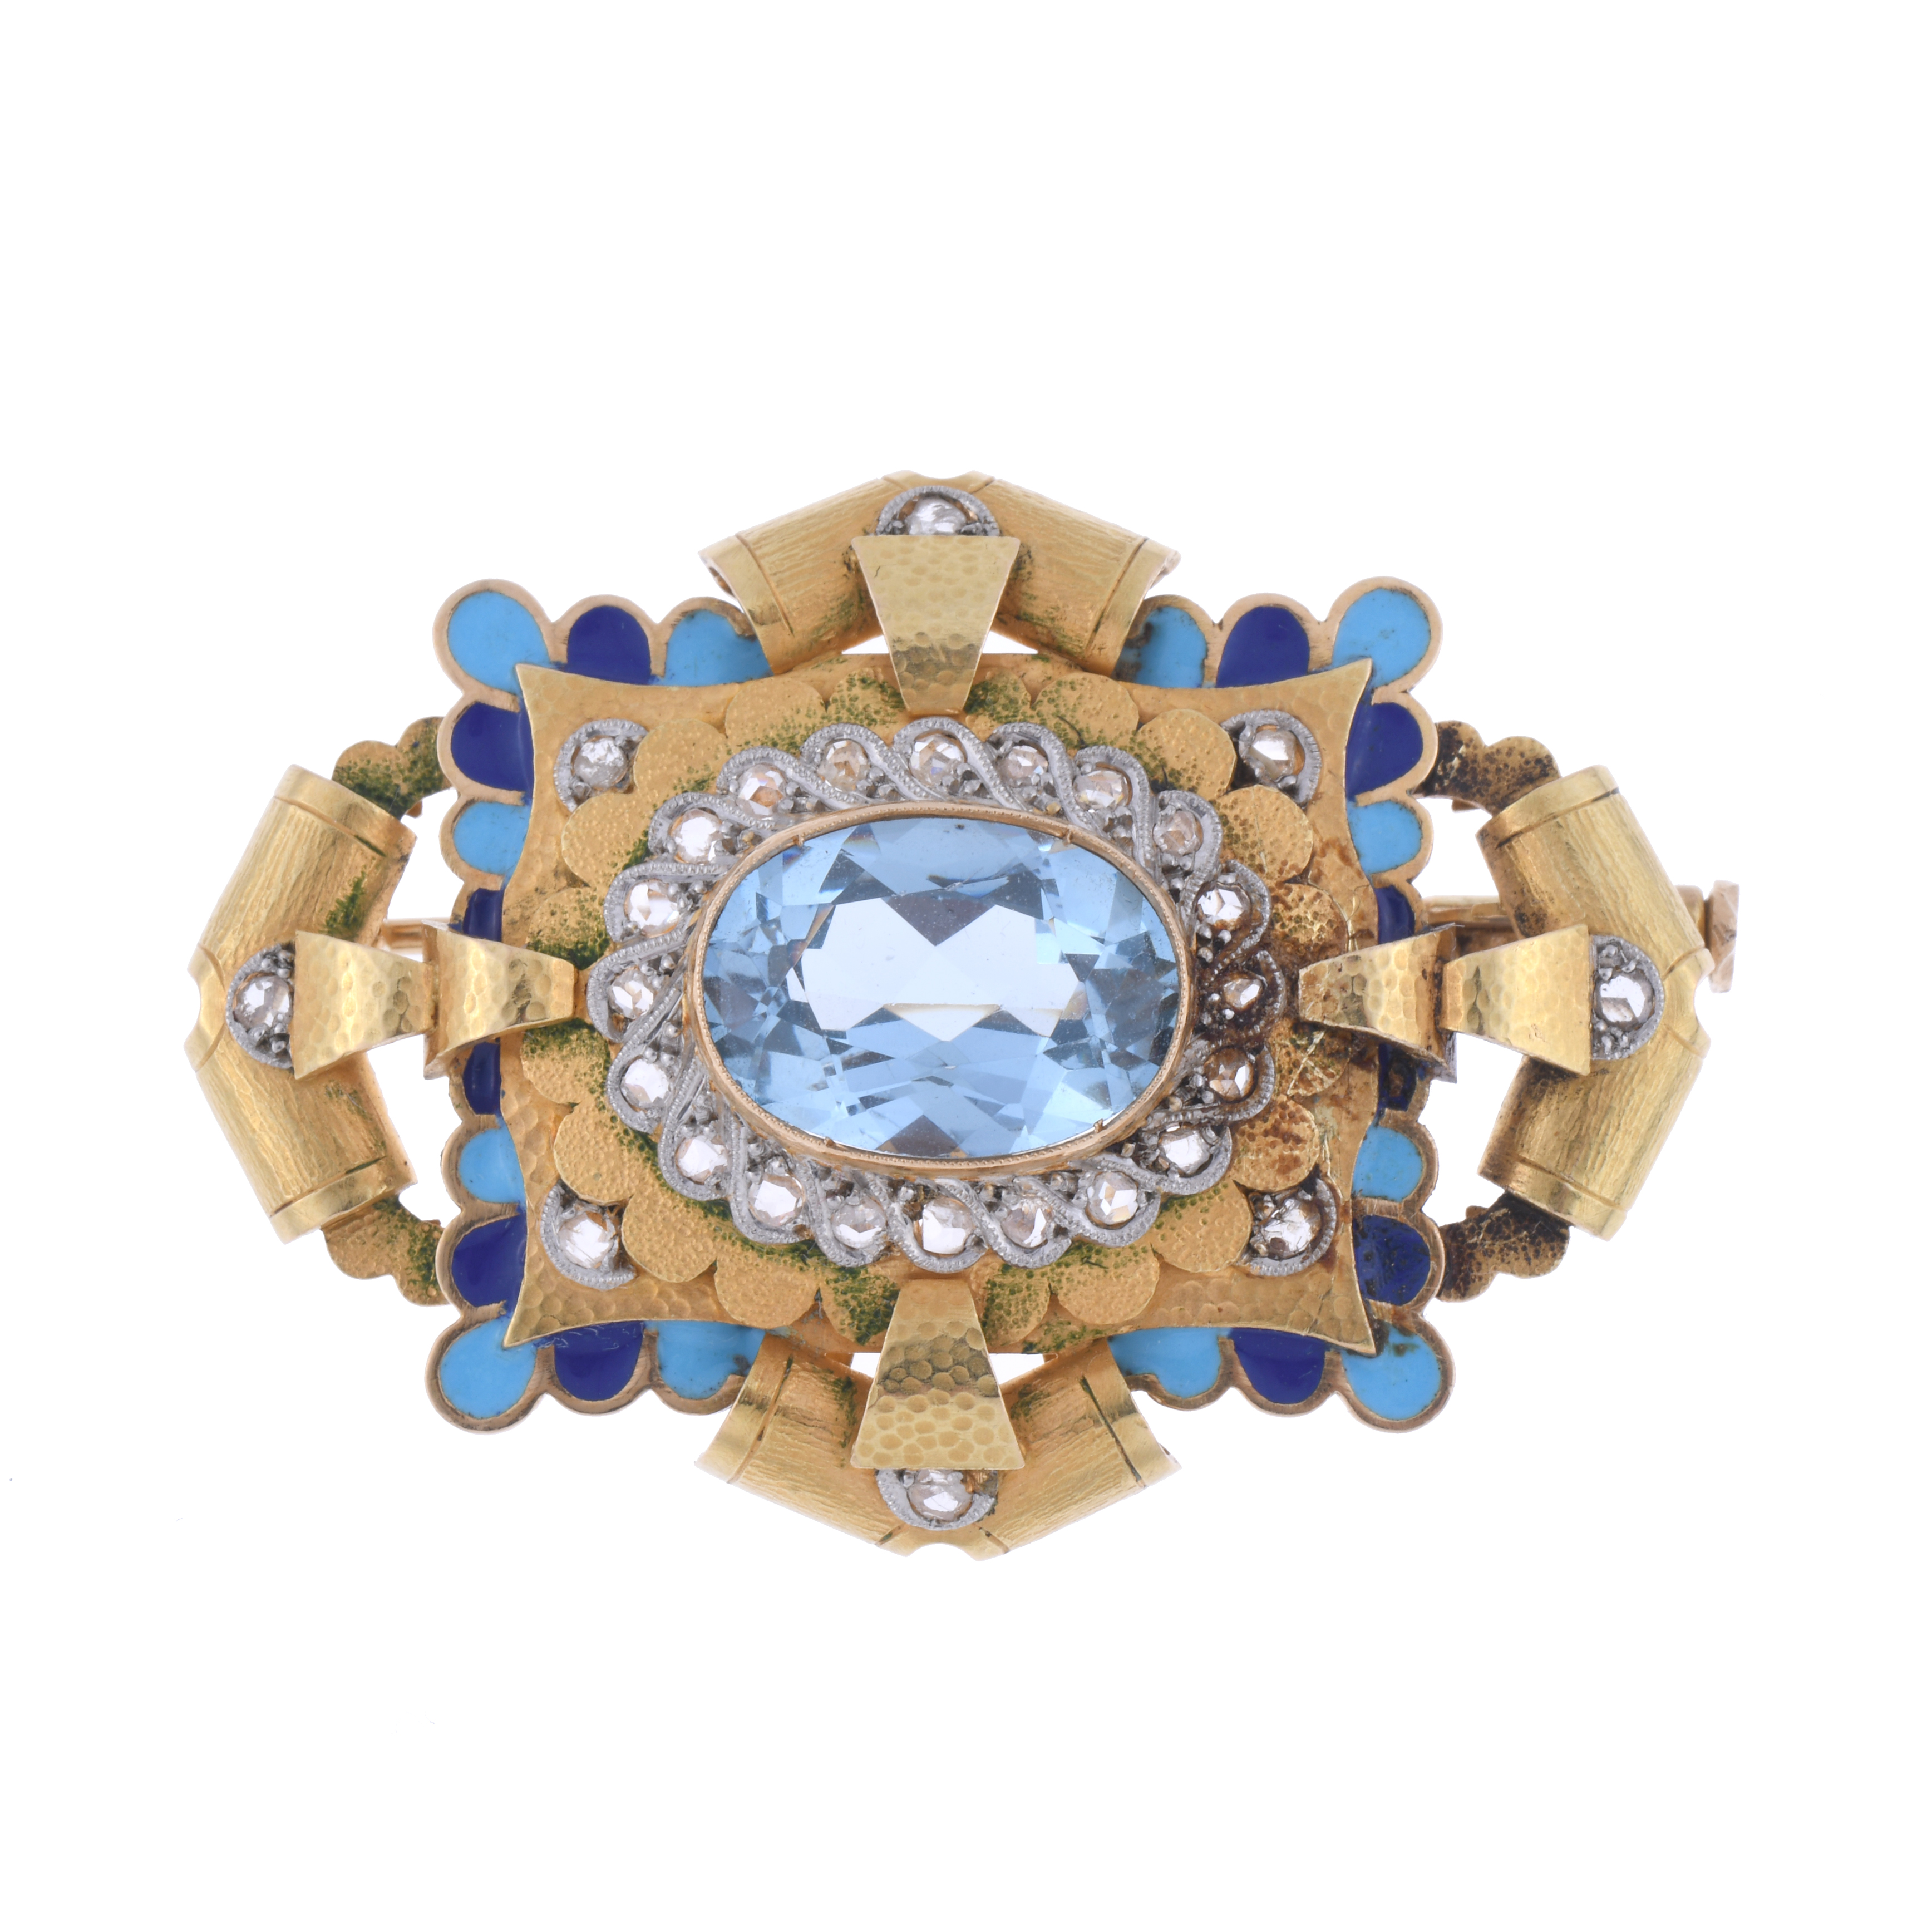 ART DECO BROOCH WITH BLUE SPINEL.